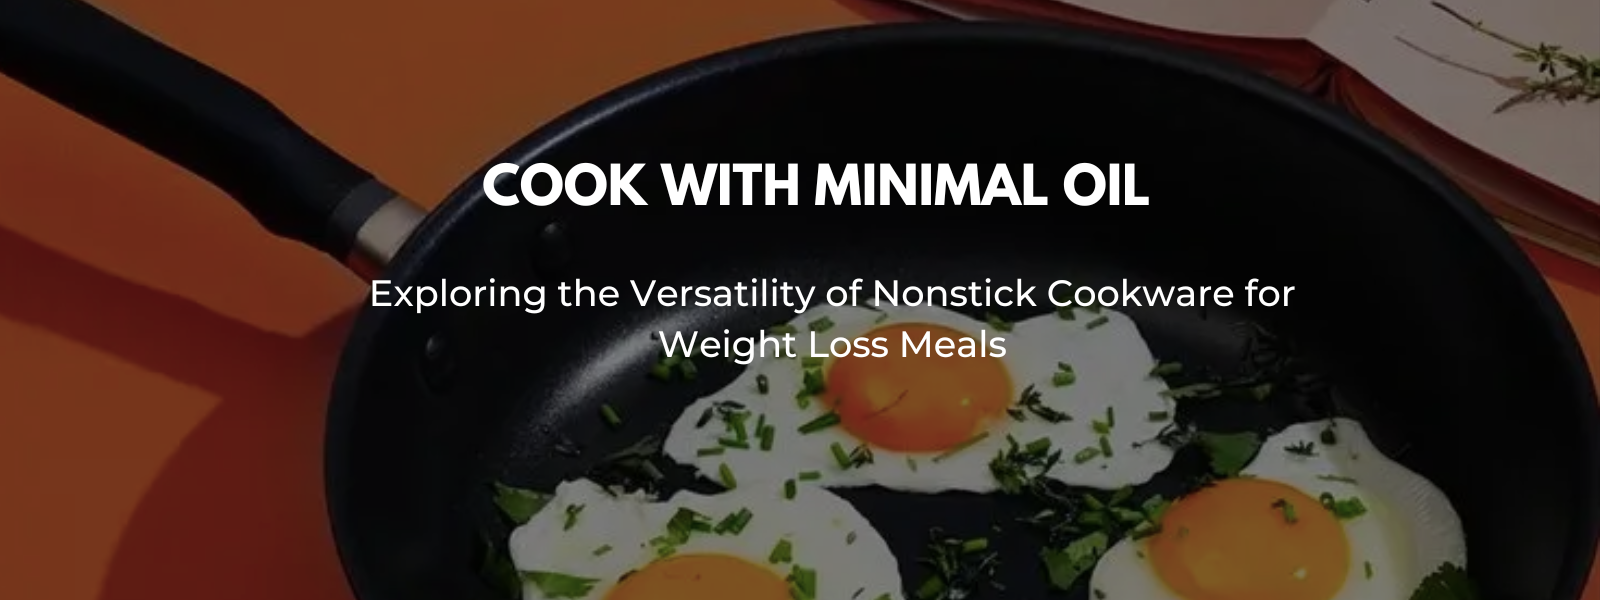 Exploring the Versatility of Nonstick Cookware for Weight Loss Meals